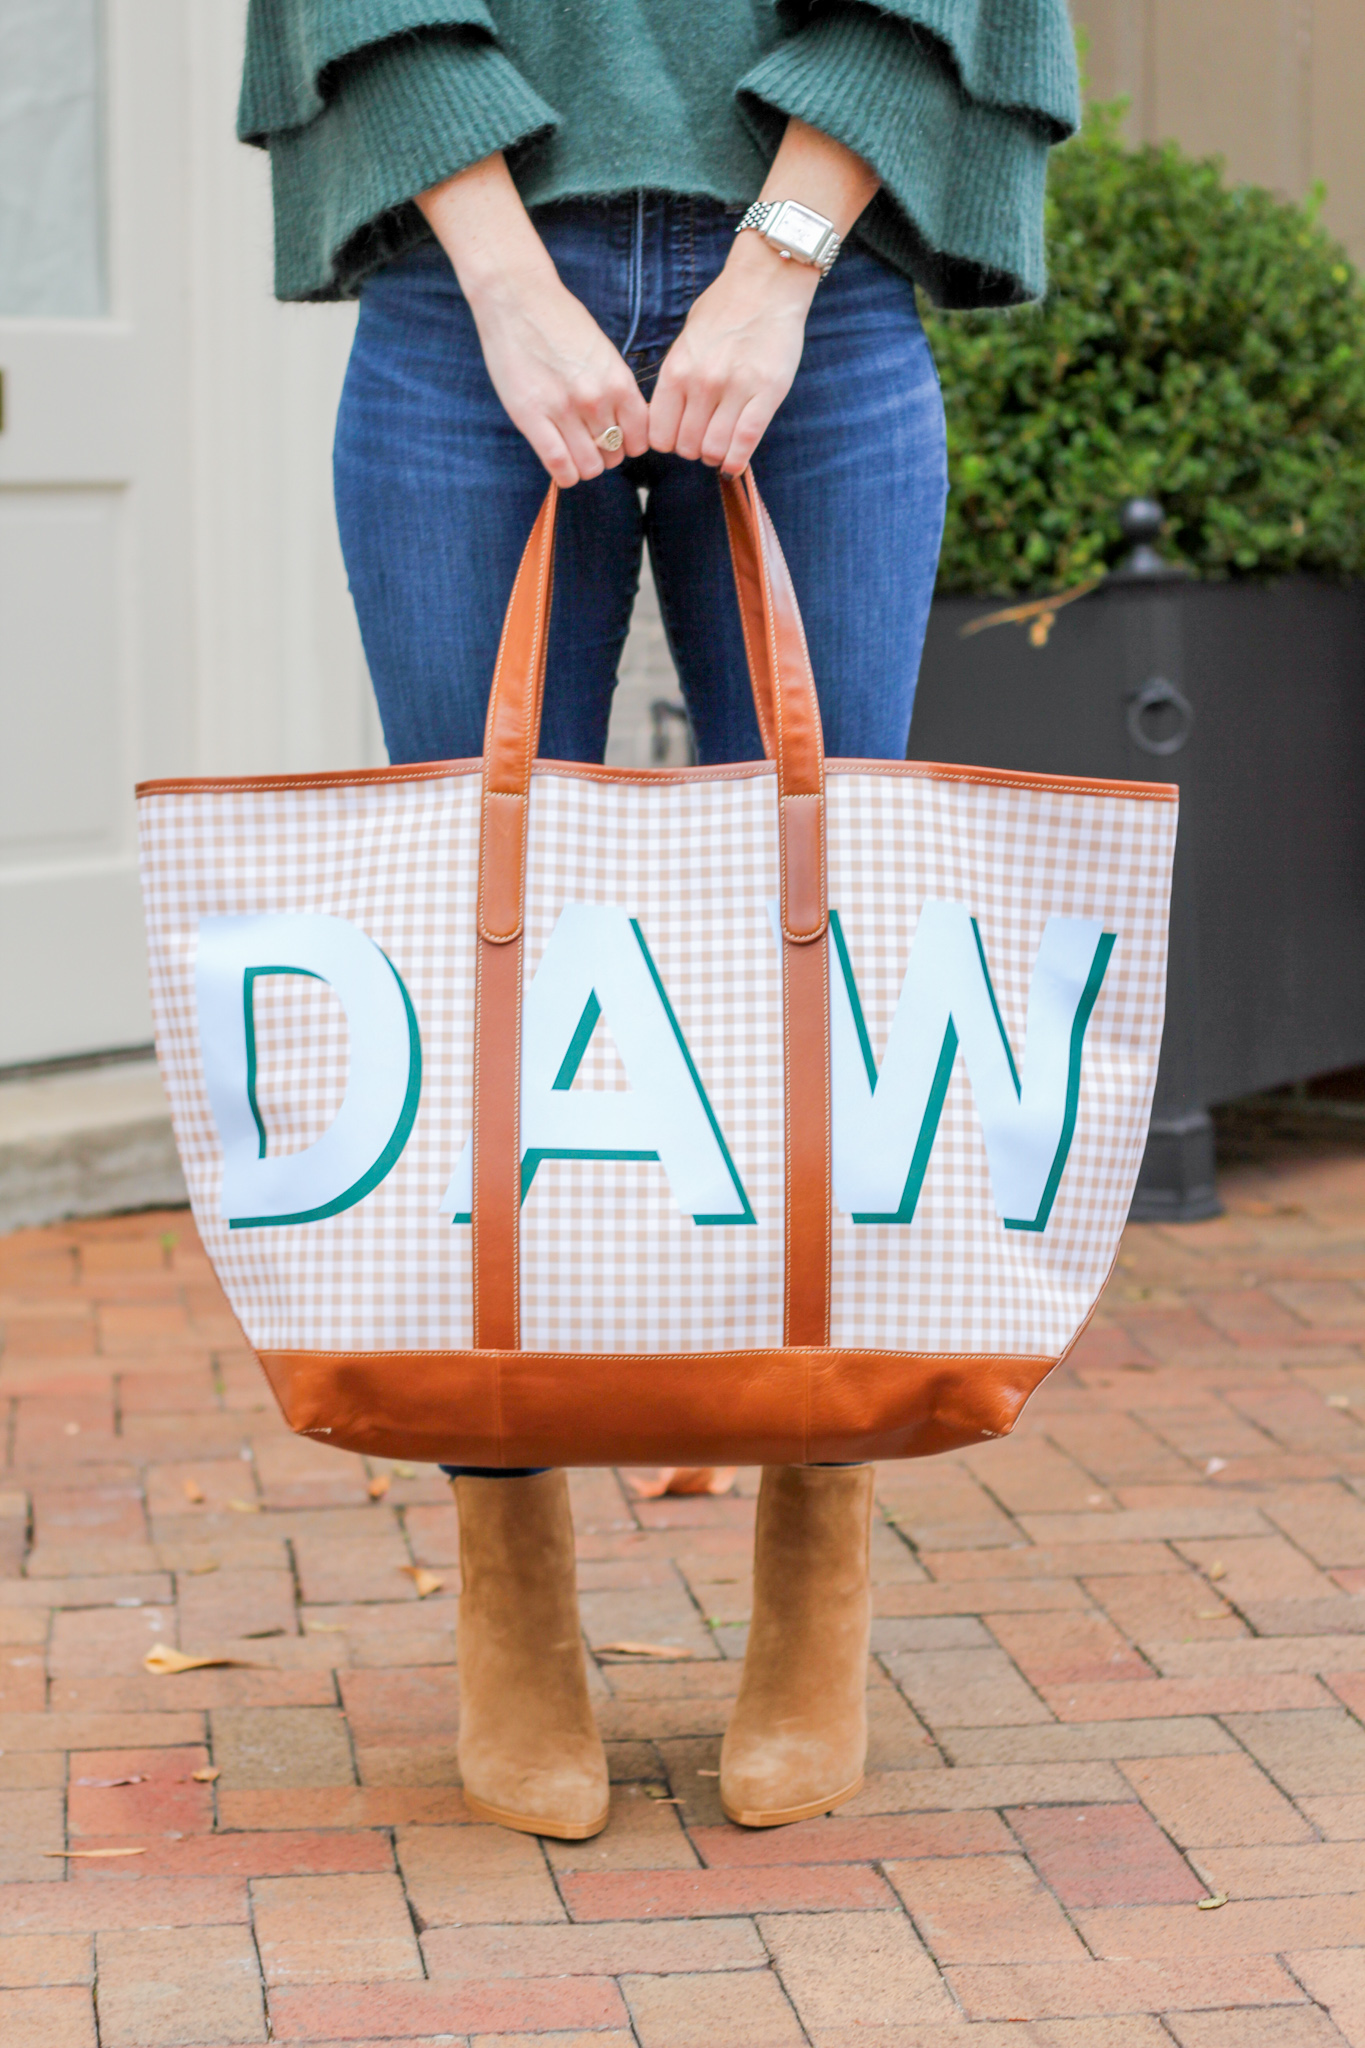 Barrington Gifts St. Anne Tote Review (the only oversized tote I